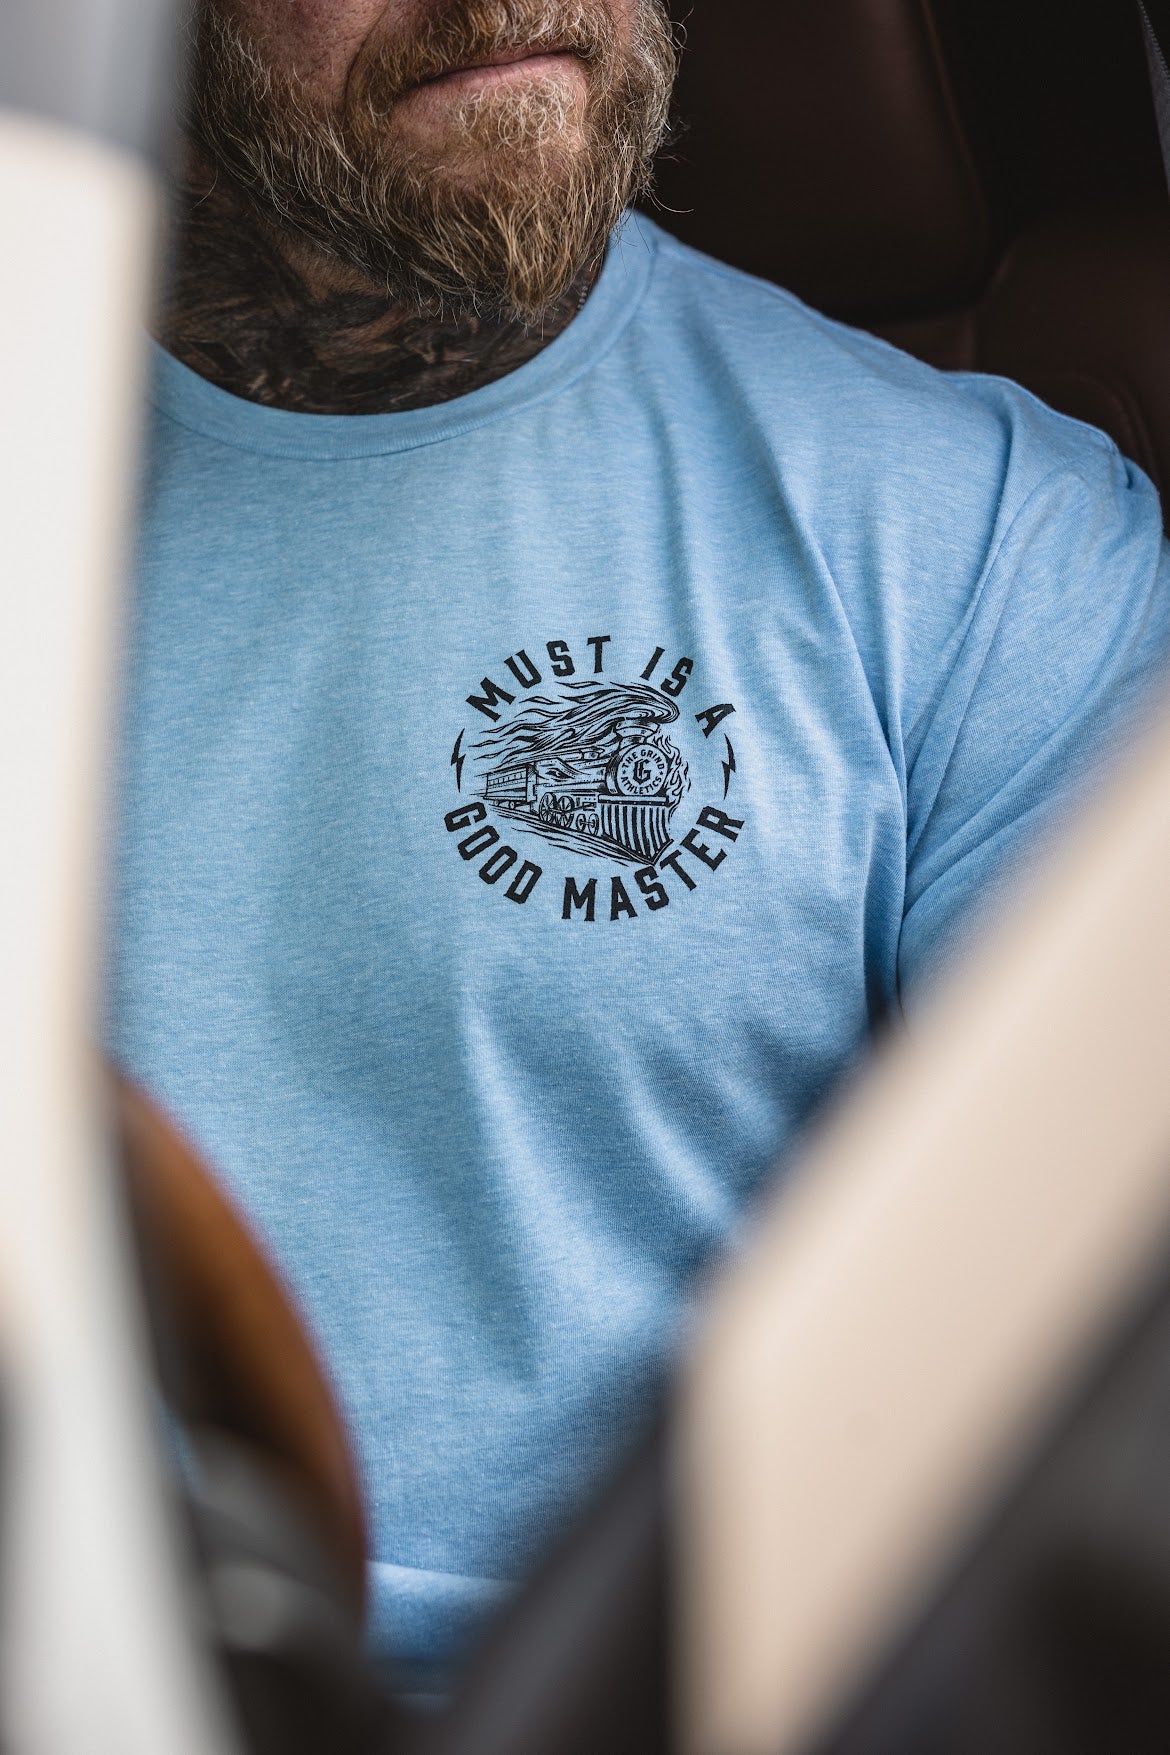 Must is a Good Master - Long Sleeve T